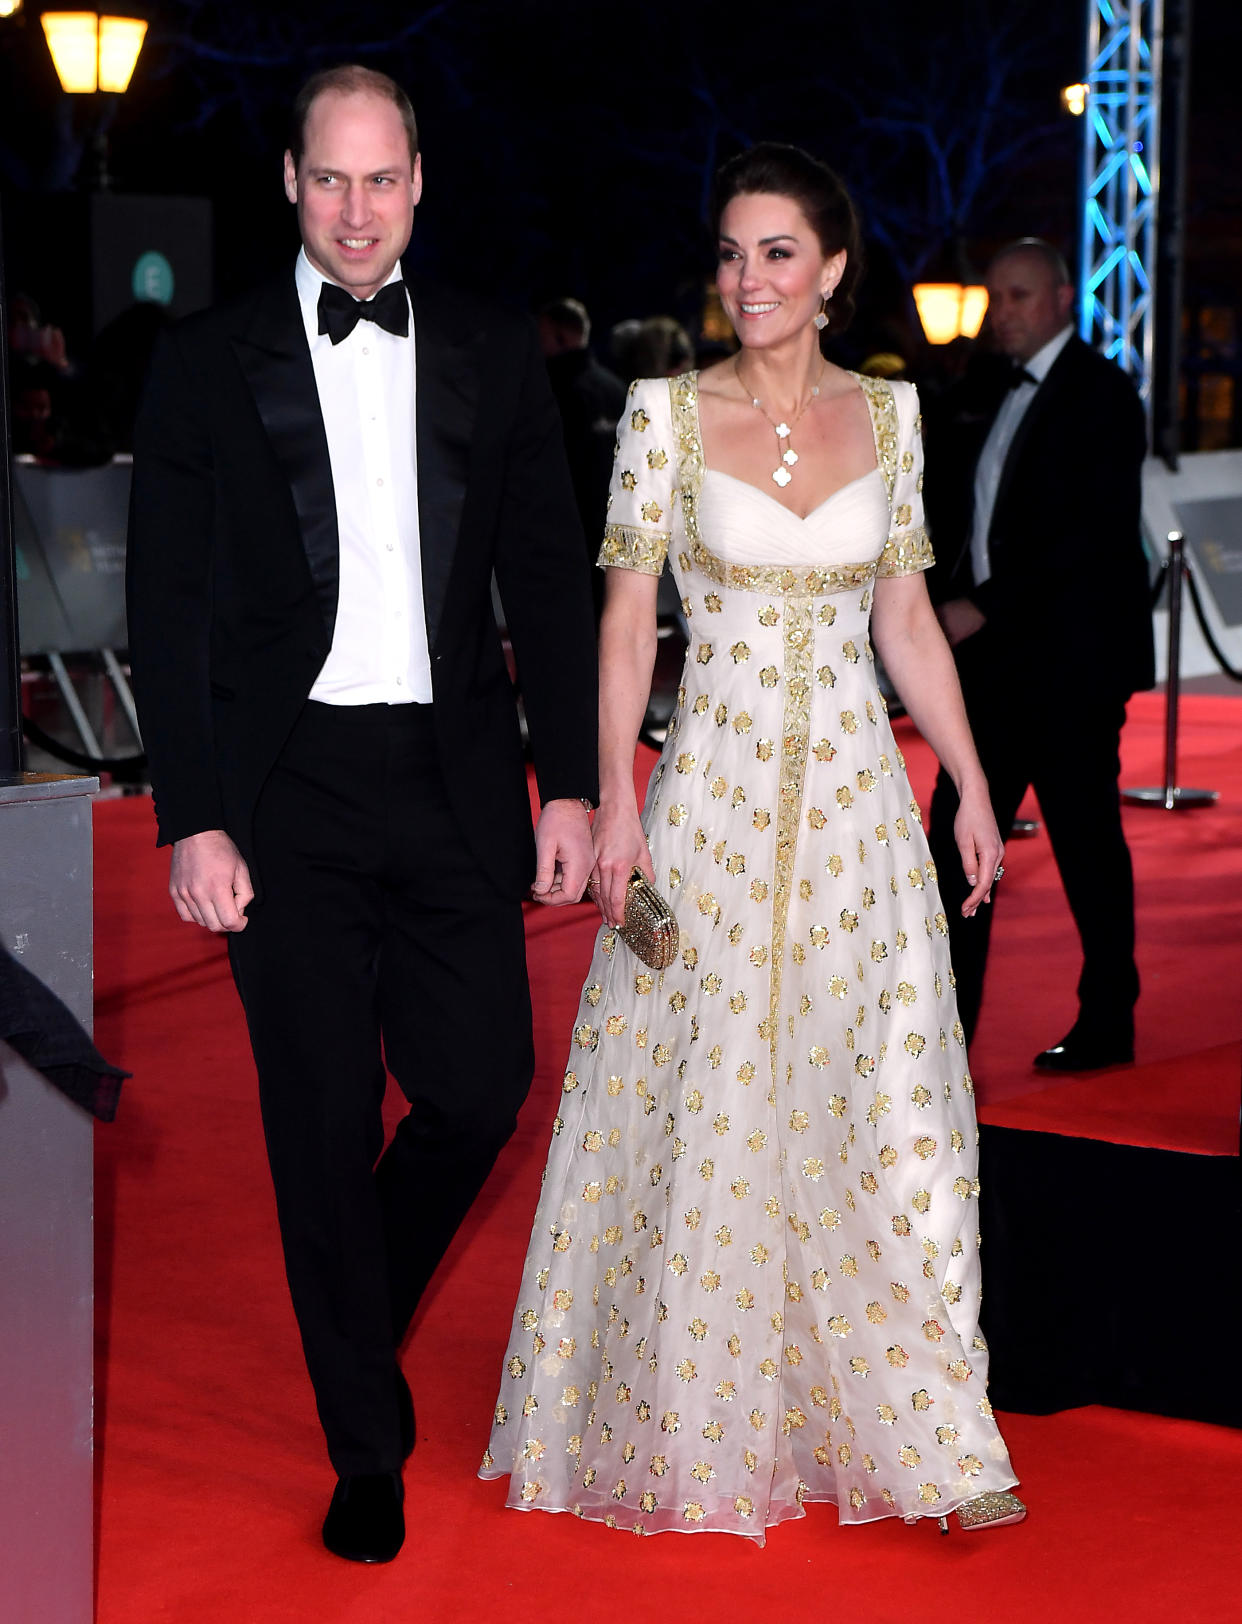 The Duke and Duchess of Cambridge at the 2020 Baftas